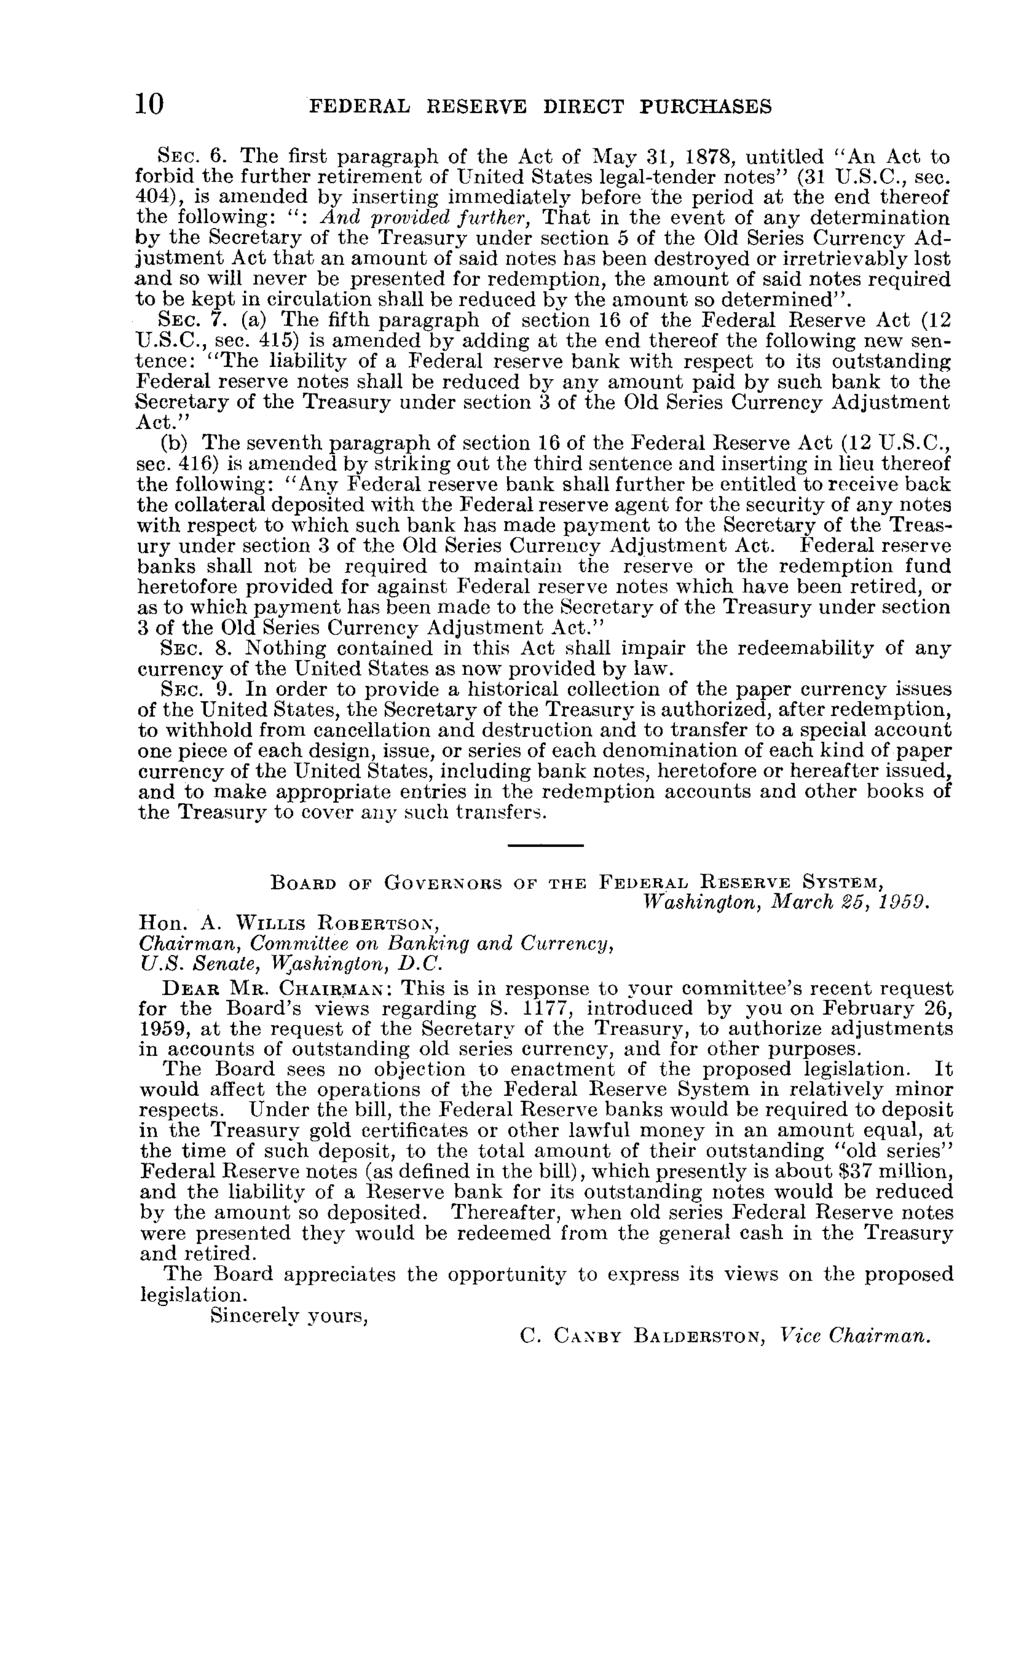 10 FEDERAL RESERVE DIRECT PURCHASES SEC. 6. The first paragraph of the Act of May 31, 1878, untitled "An Act to forbid the further retirement of United States legal-tender notes" (31 U.S.C., sec.